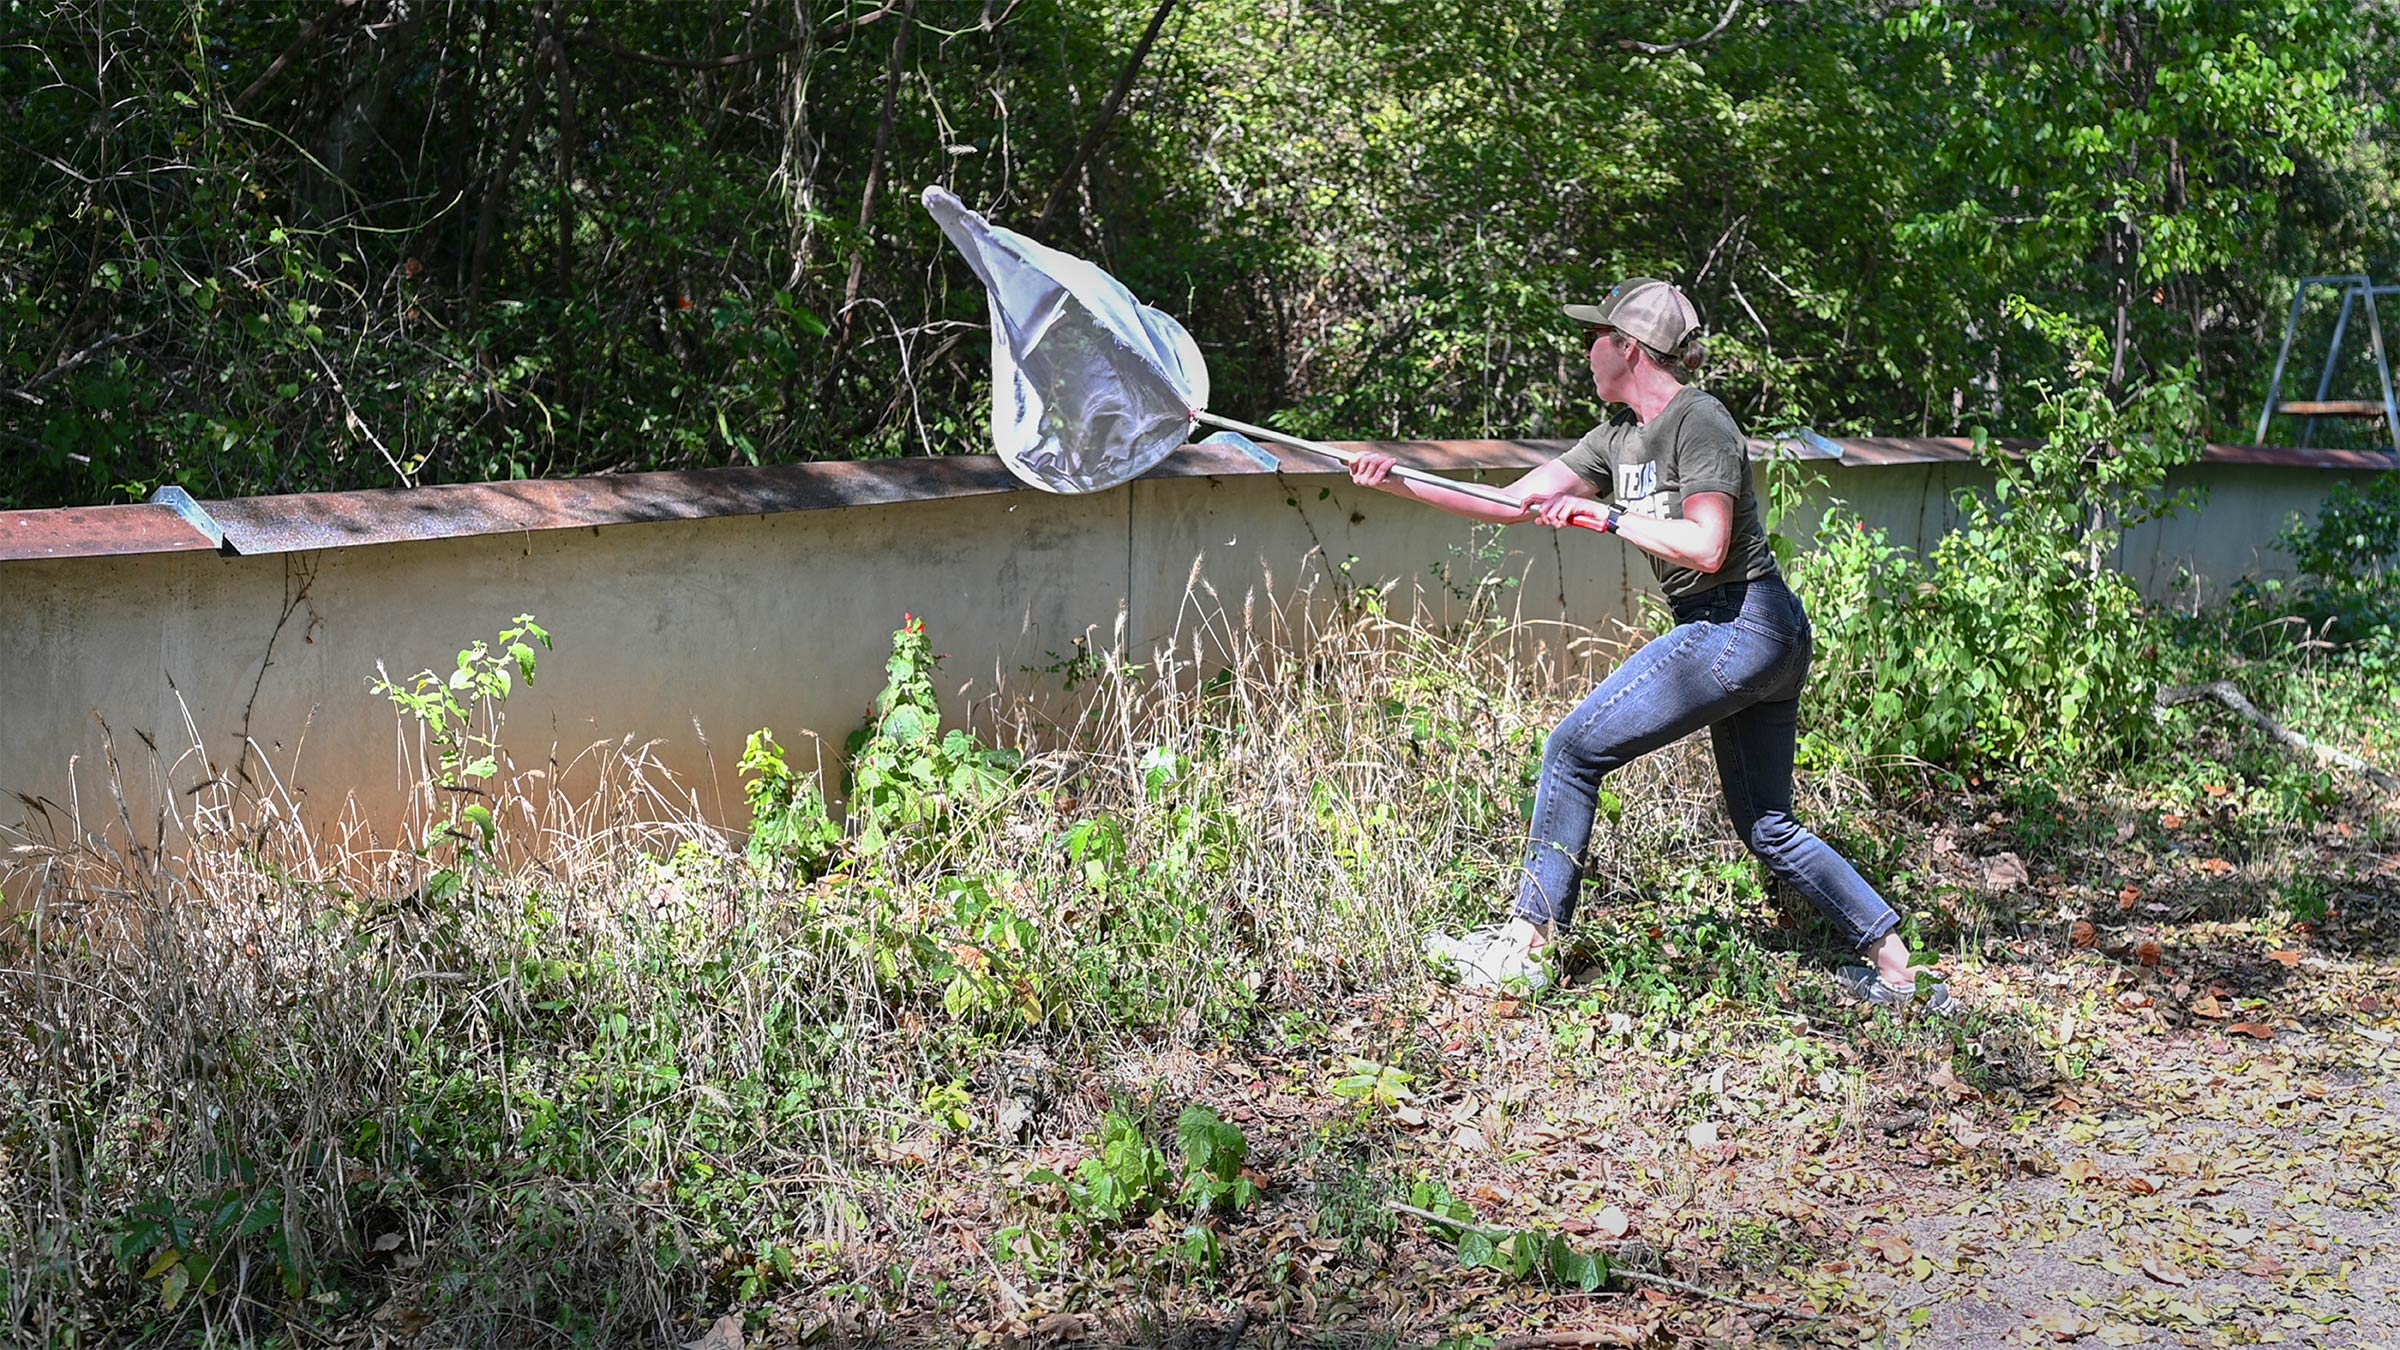 A researcher in a hat uses a large butterfly net to capture something near a wall in a wooded area